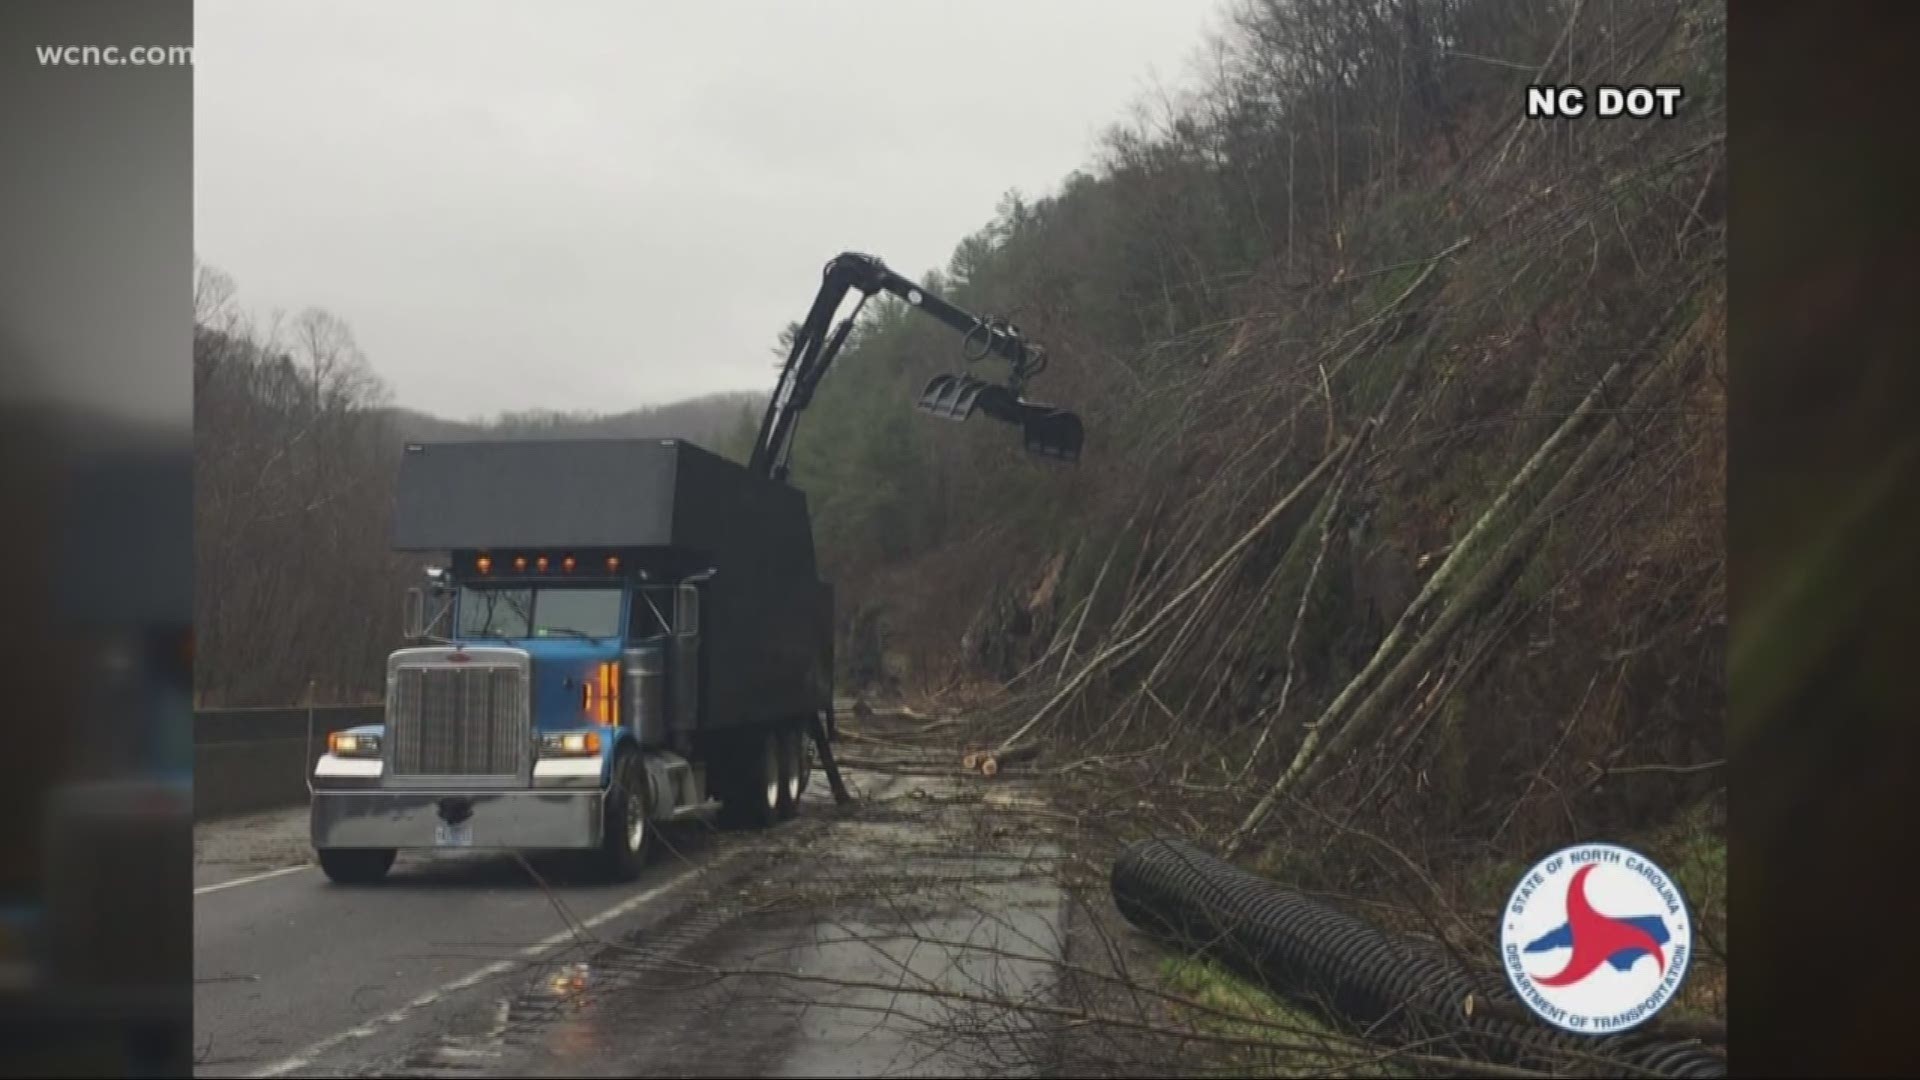 Crews worked to clean up a rock slide that shut down a stretch of I-40 between Asheville and the Tennessee state line. The road has re-opened, but officials say the Pigeon River Gorge will be closed for the next week.